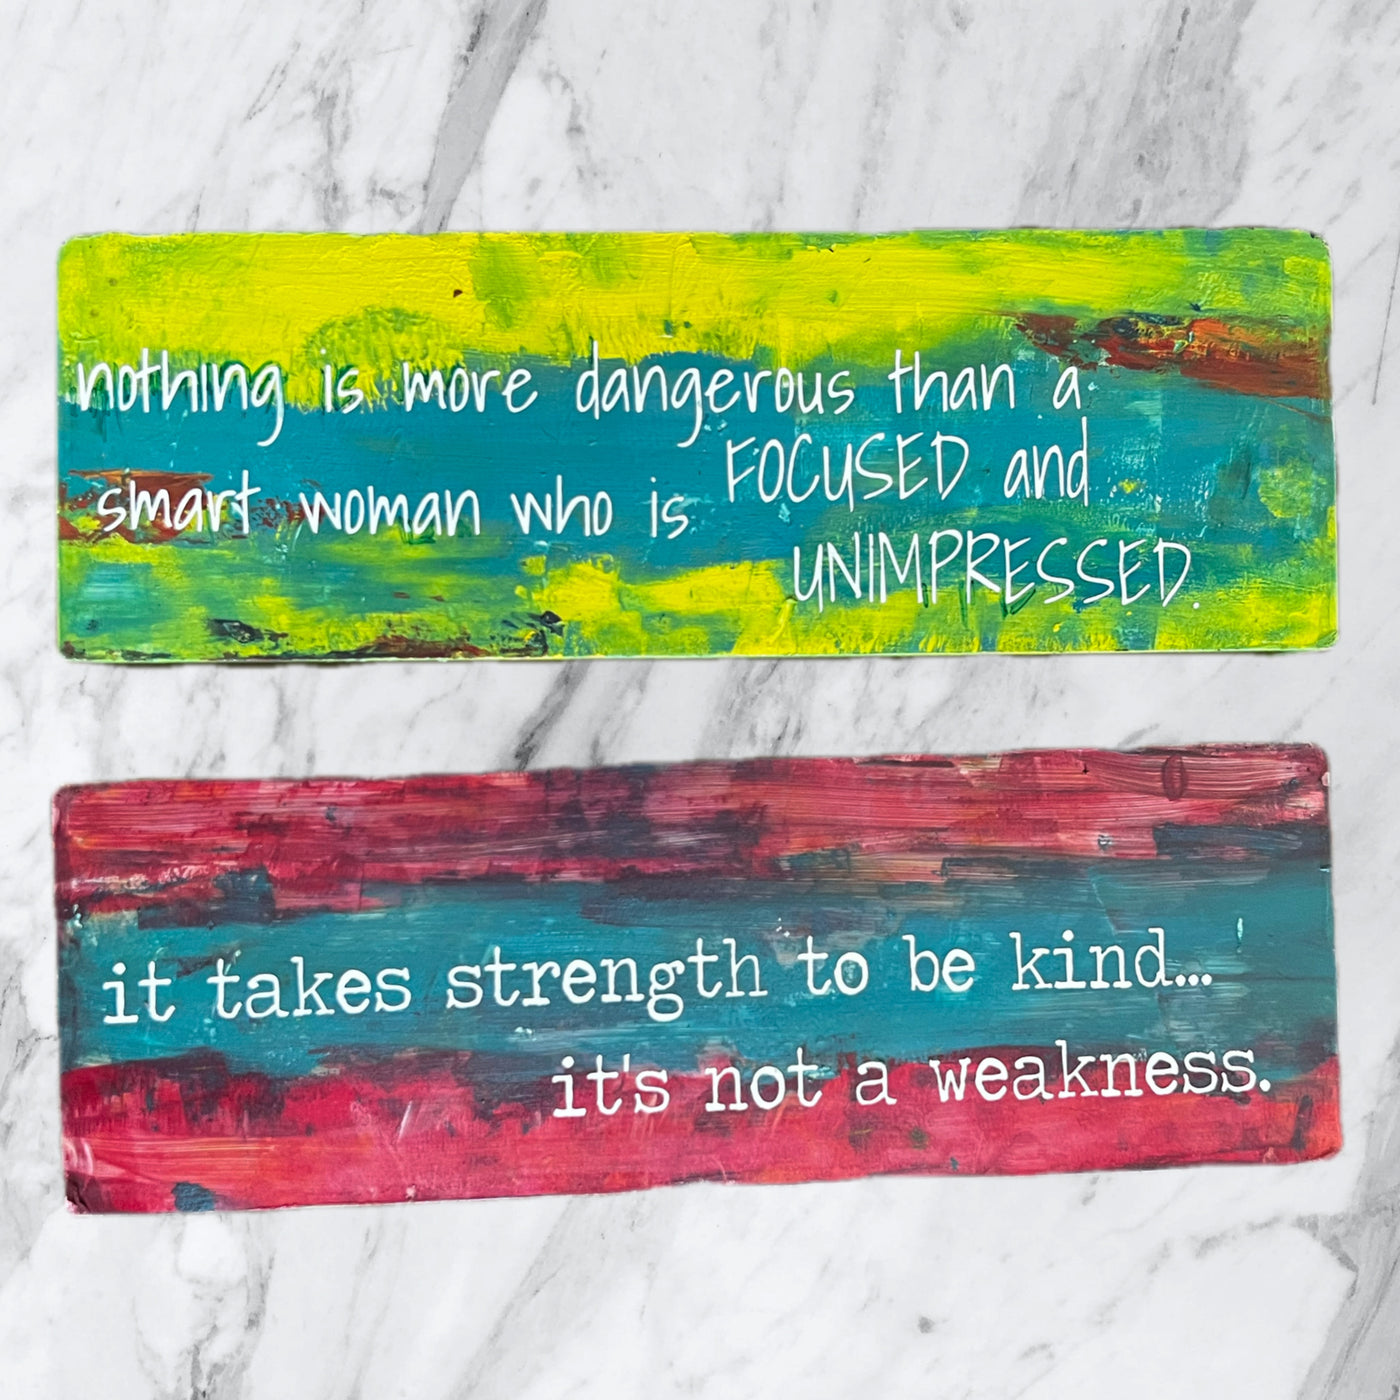 it takes strength to be kind - wood panel art